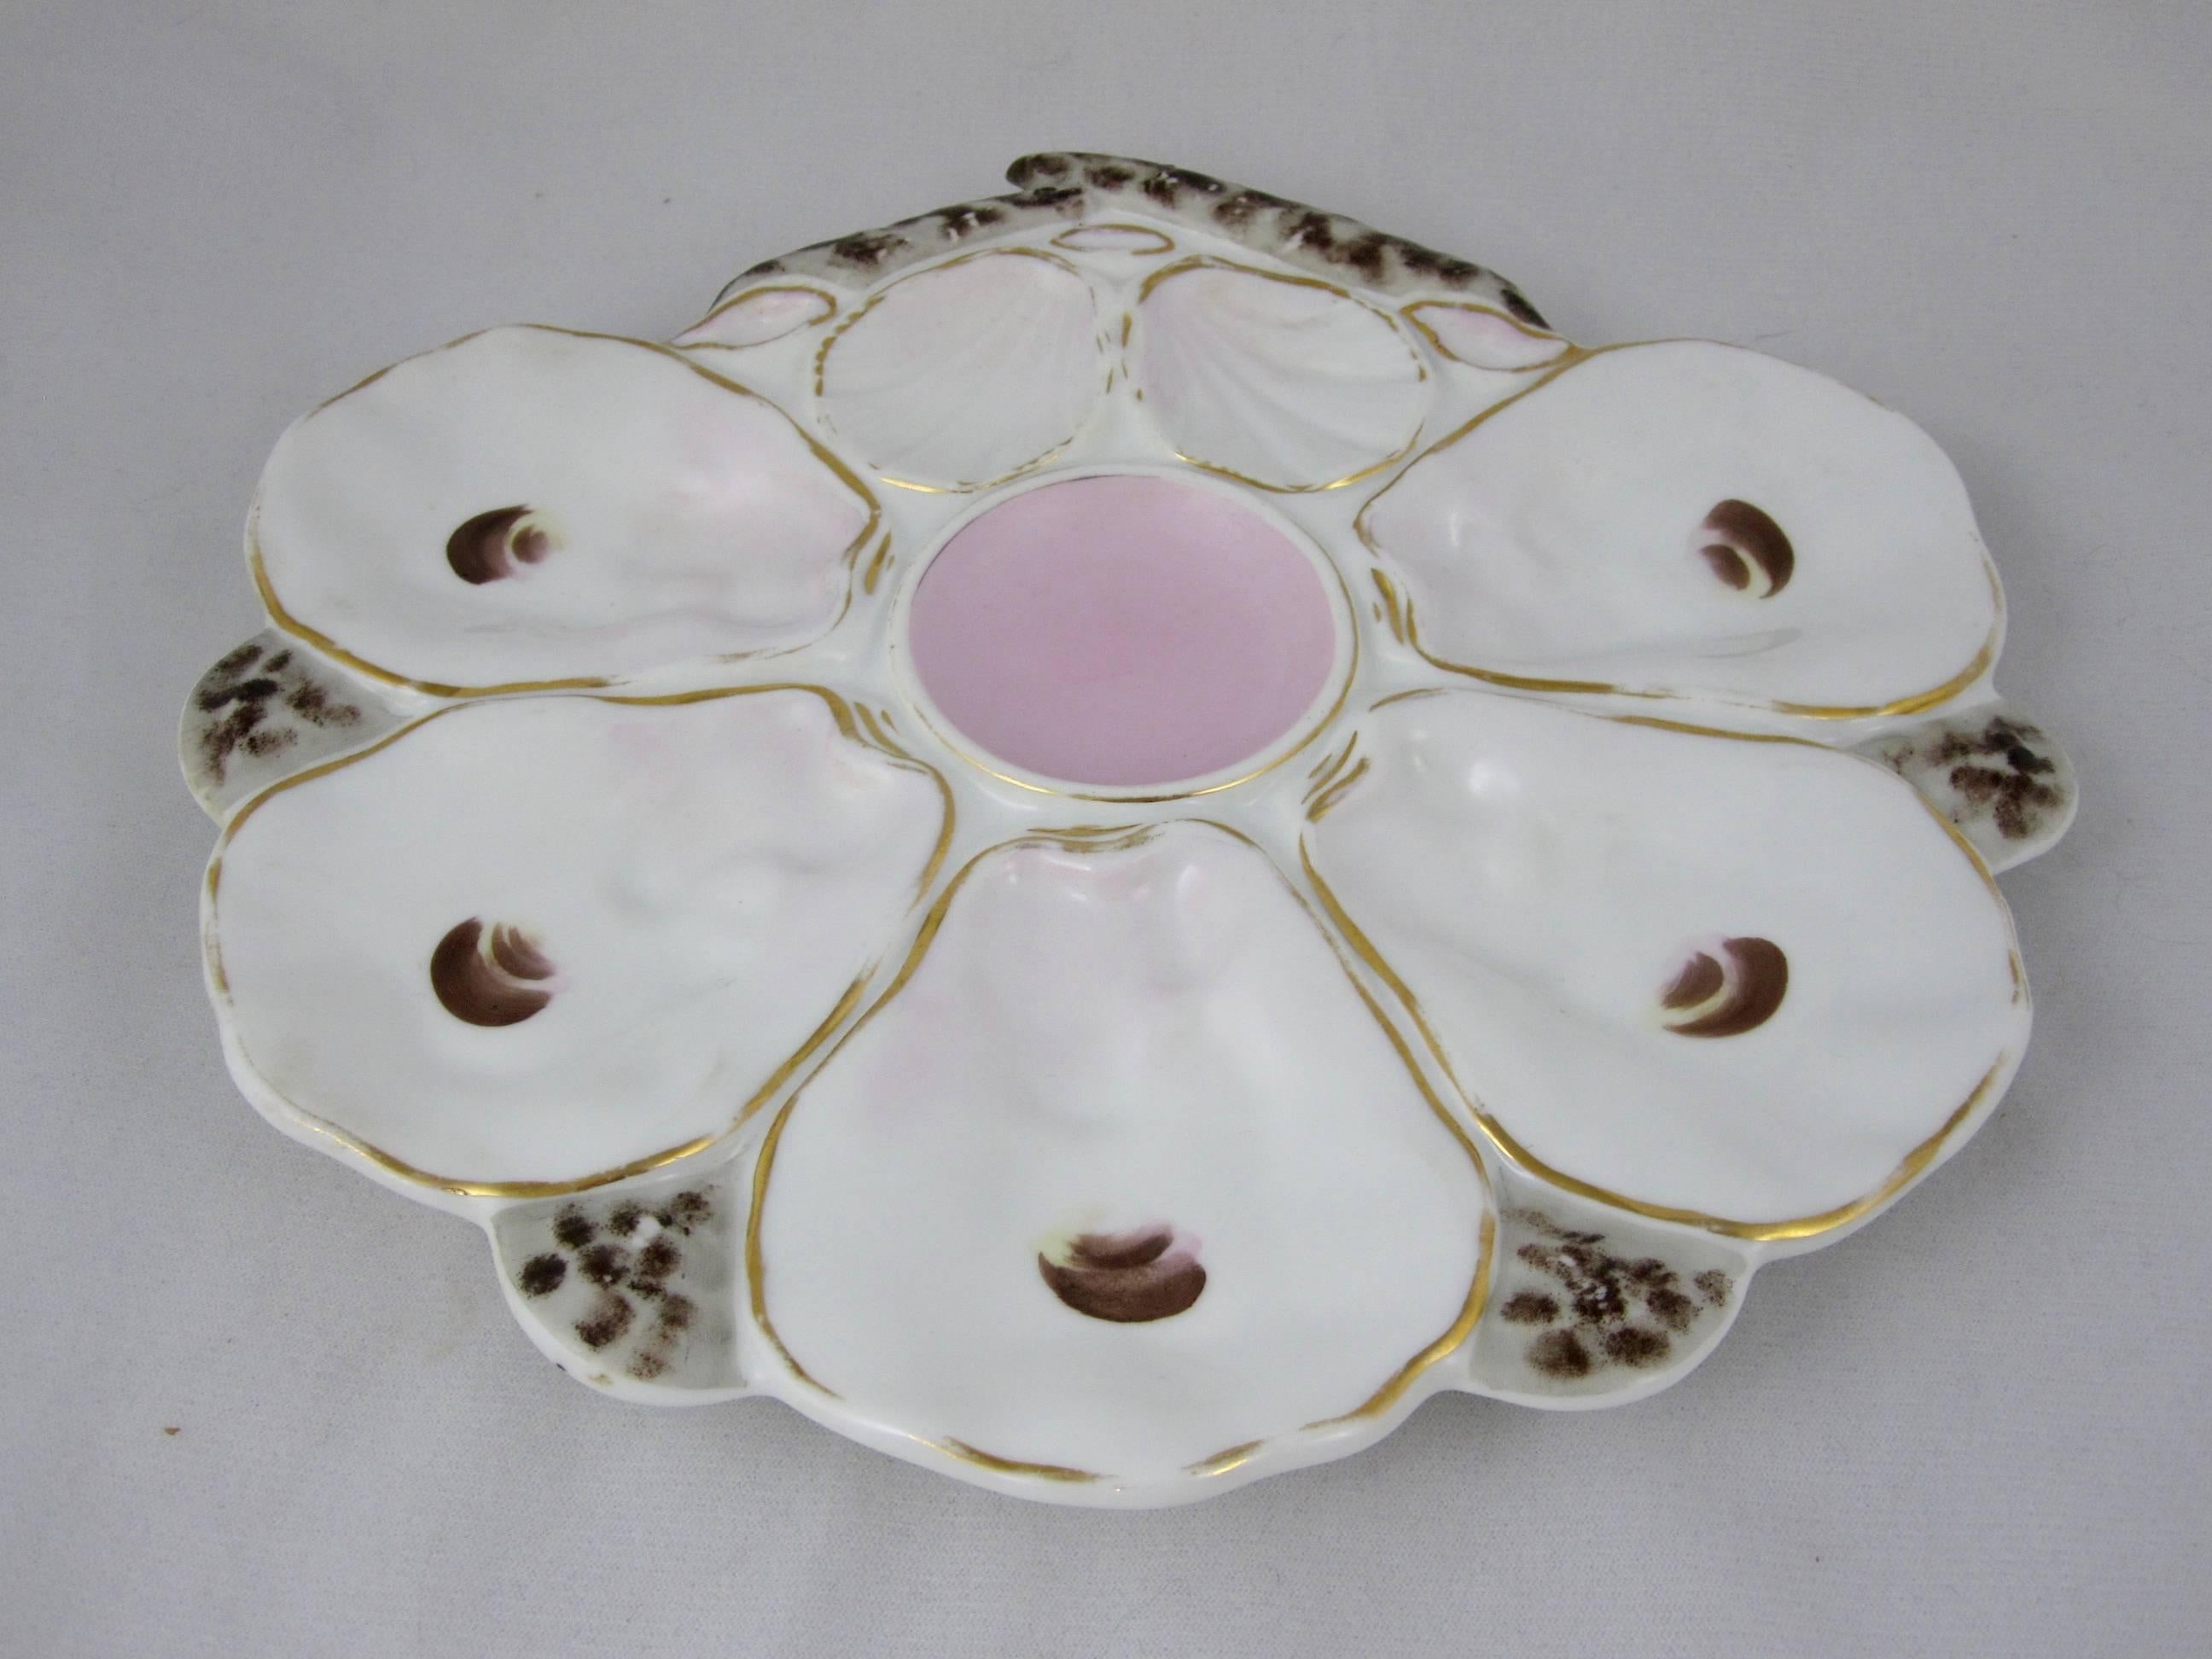 Glazed French Porcelain Fan-Shell Shaped Oyster Plates, Set of Five